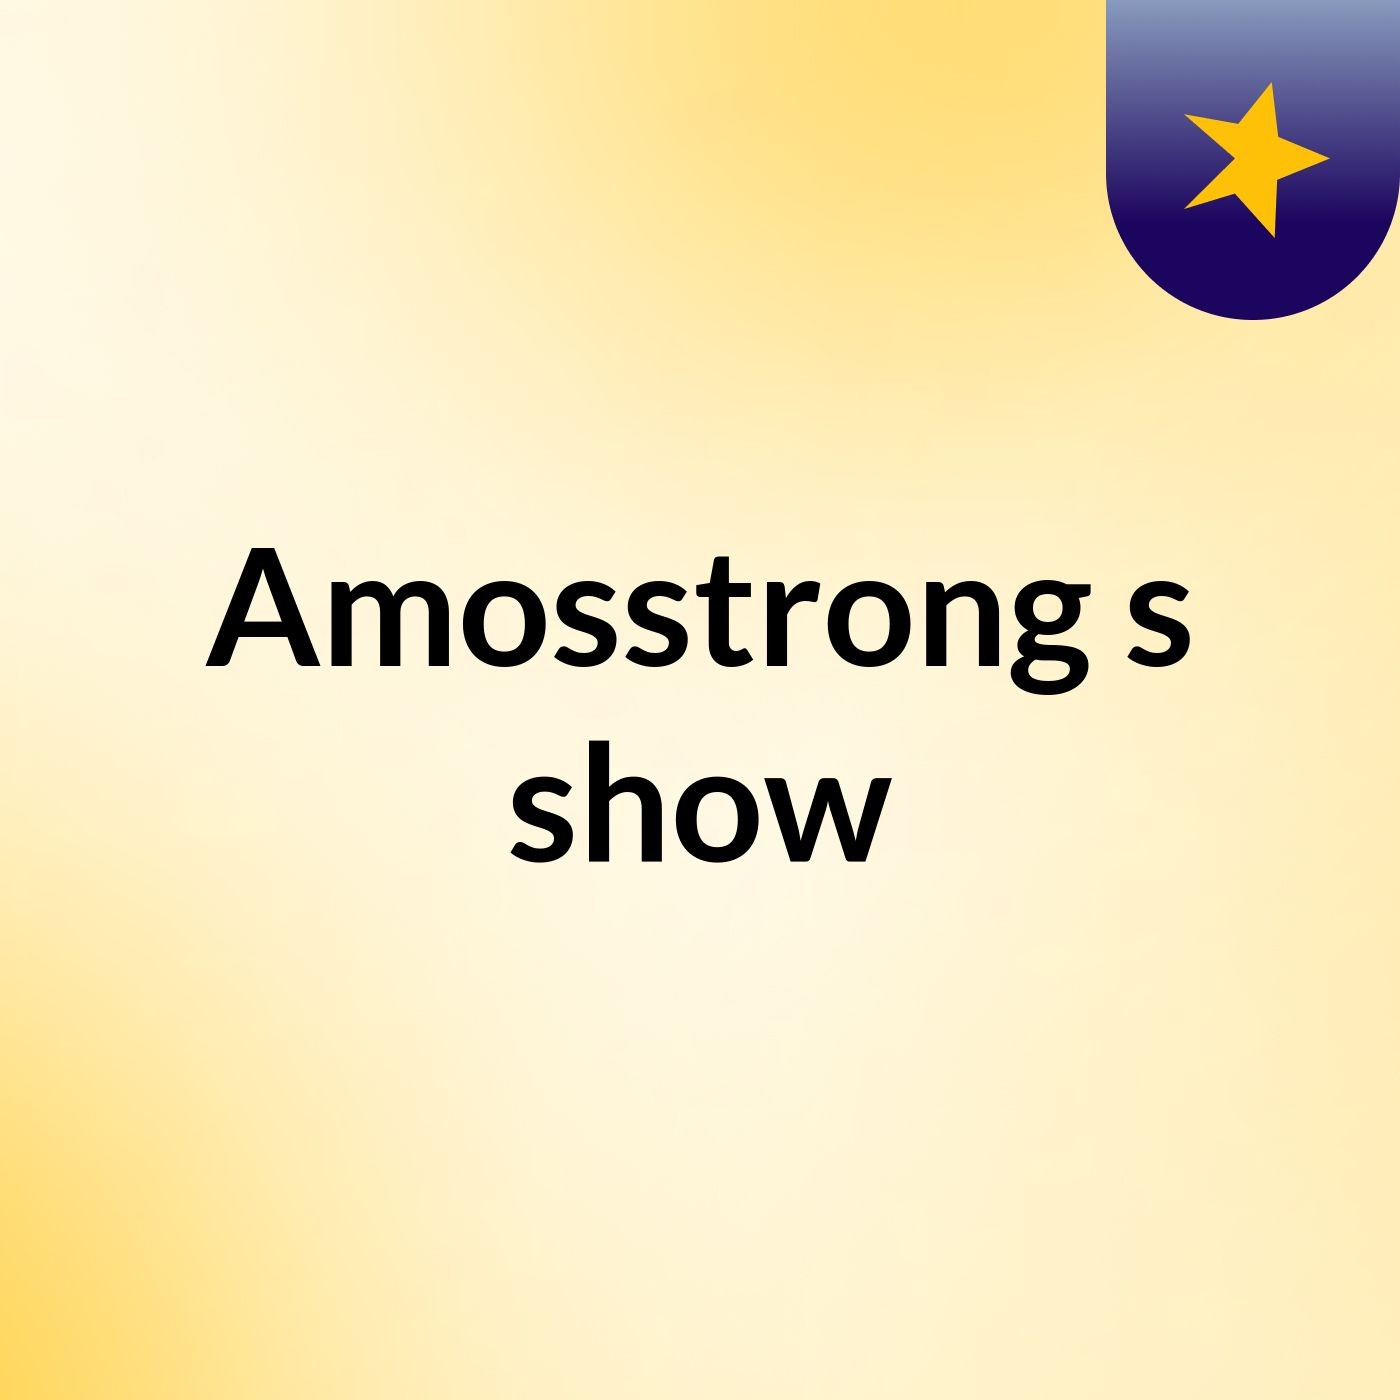 Amosstrong's show